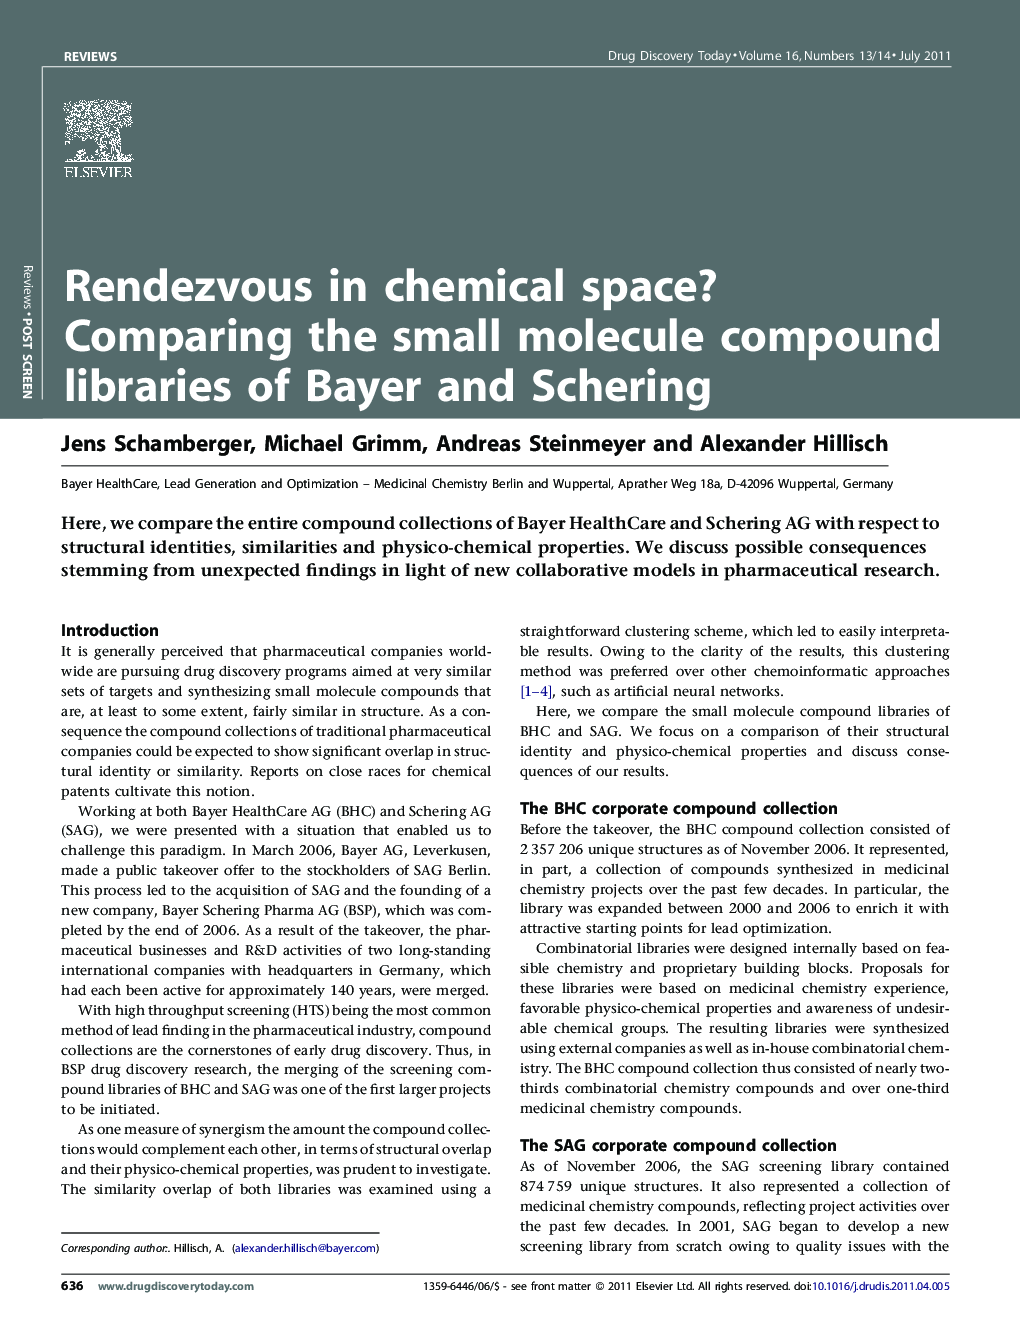 Rendezvous in chemical space? Comparing the small molecule compound libraries of Bayer and Schering